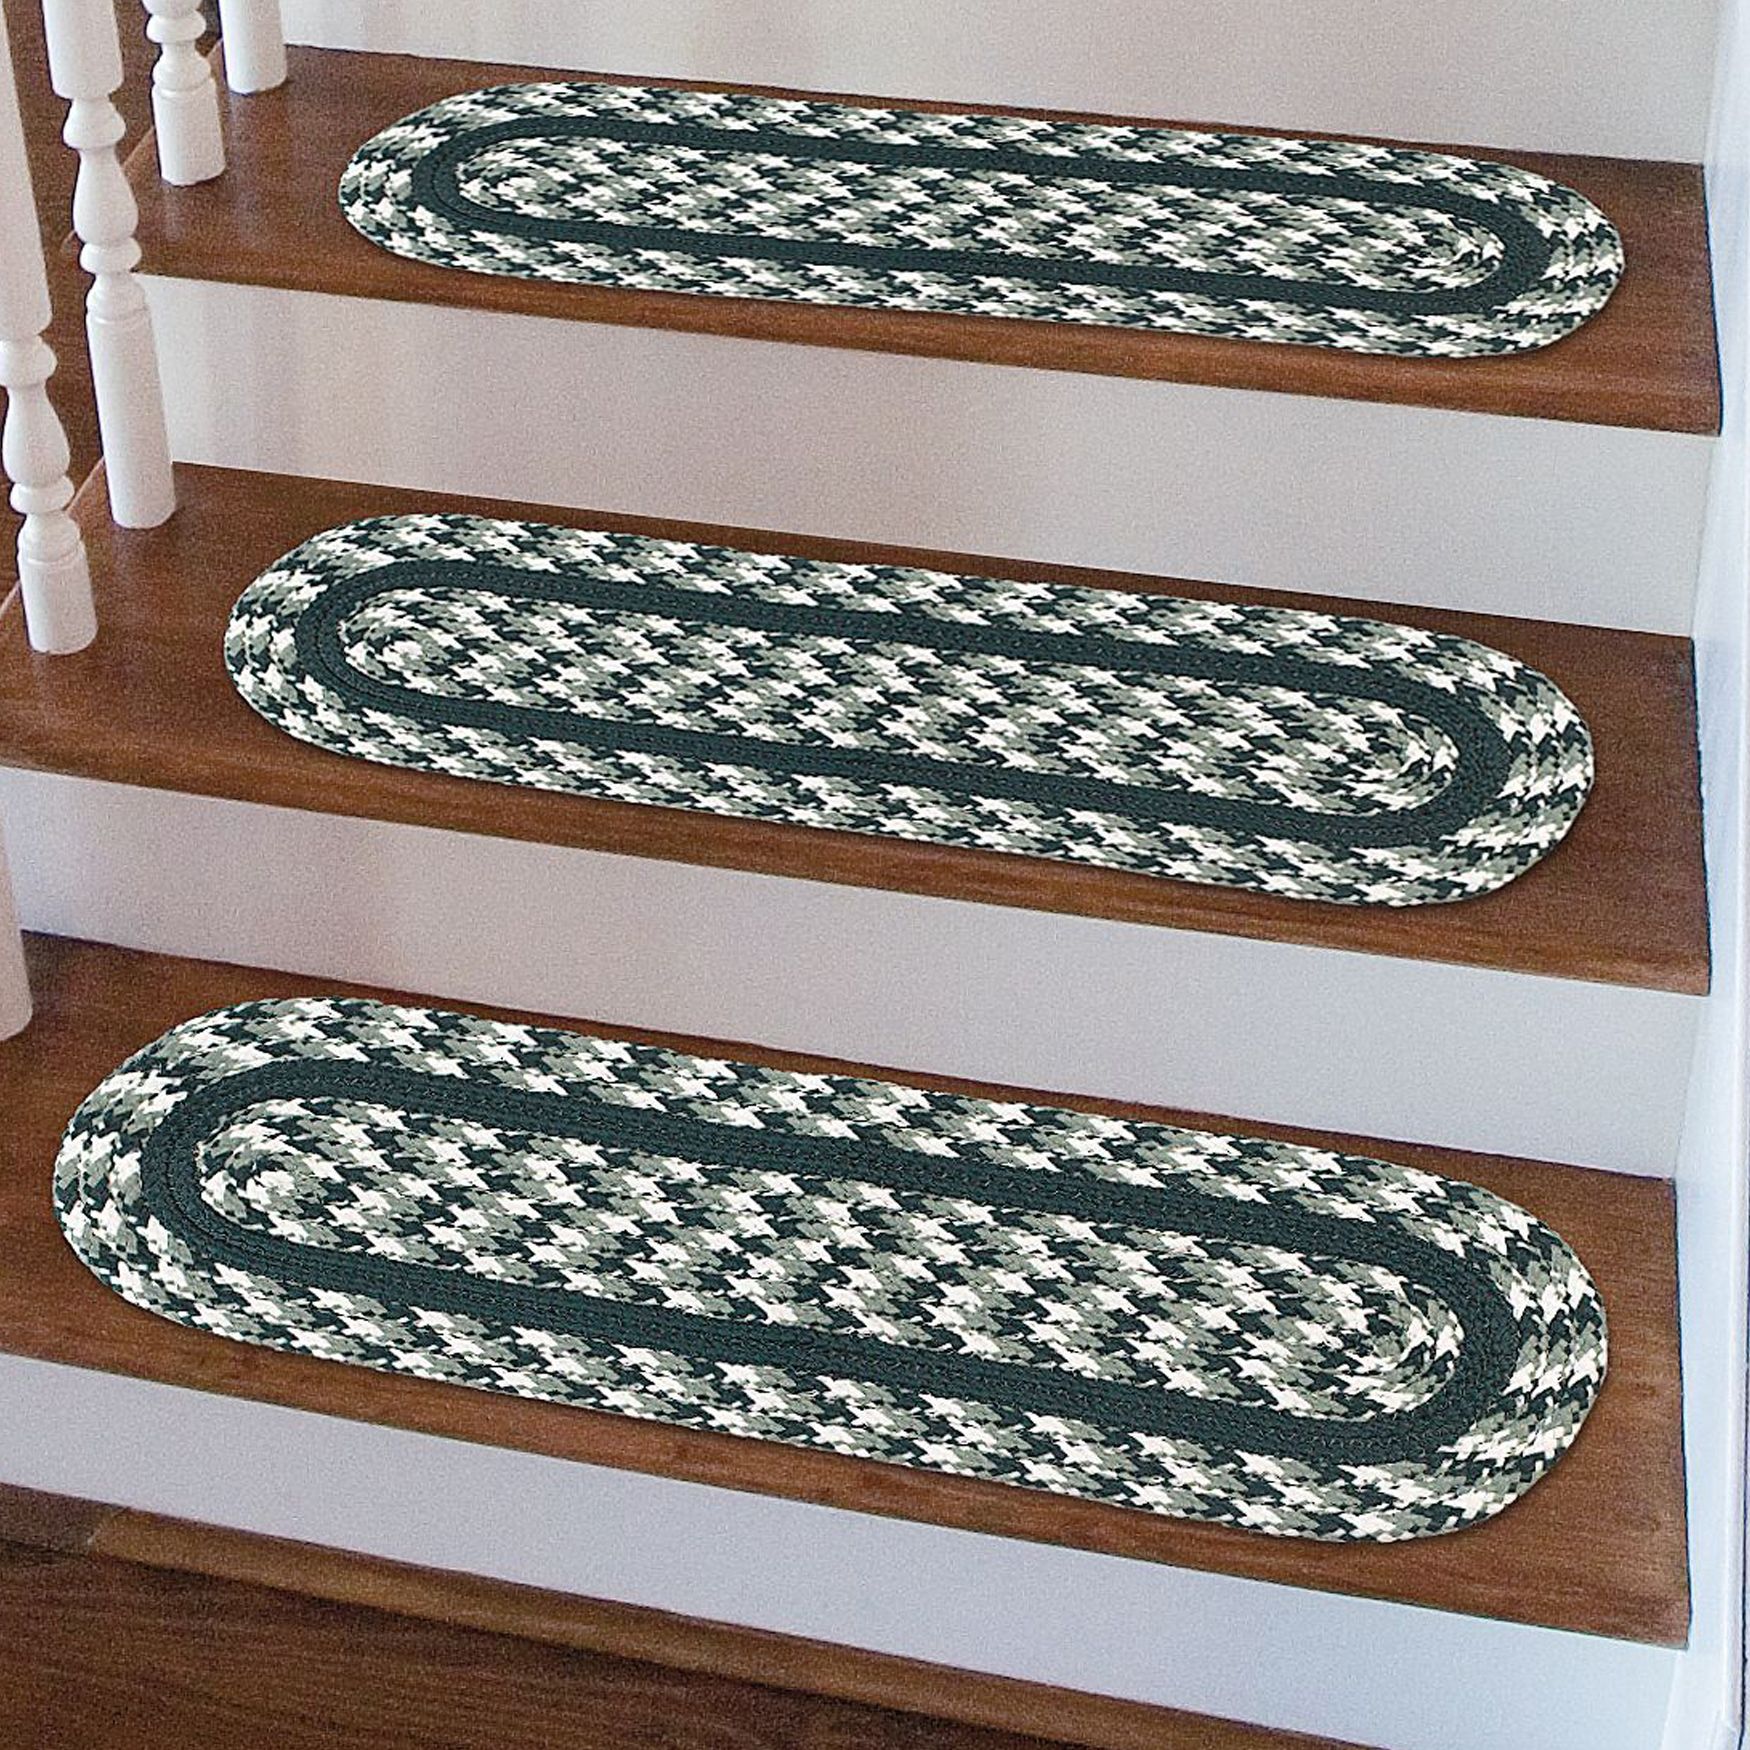 Exclusive Stair Tread Rugs Latest Door Stair Design With Regard To Braided Rug Stair Treads (View 5 of 20)